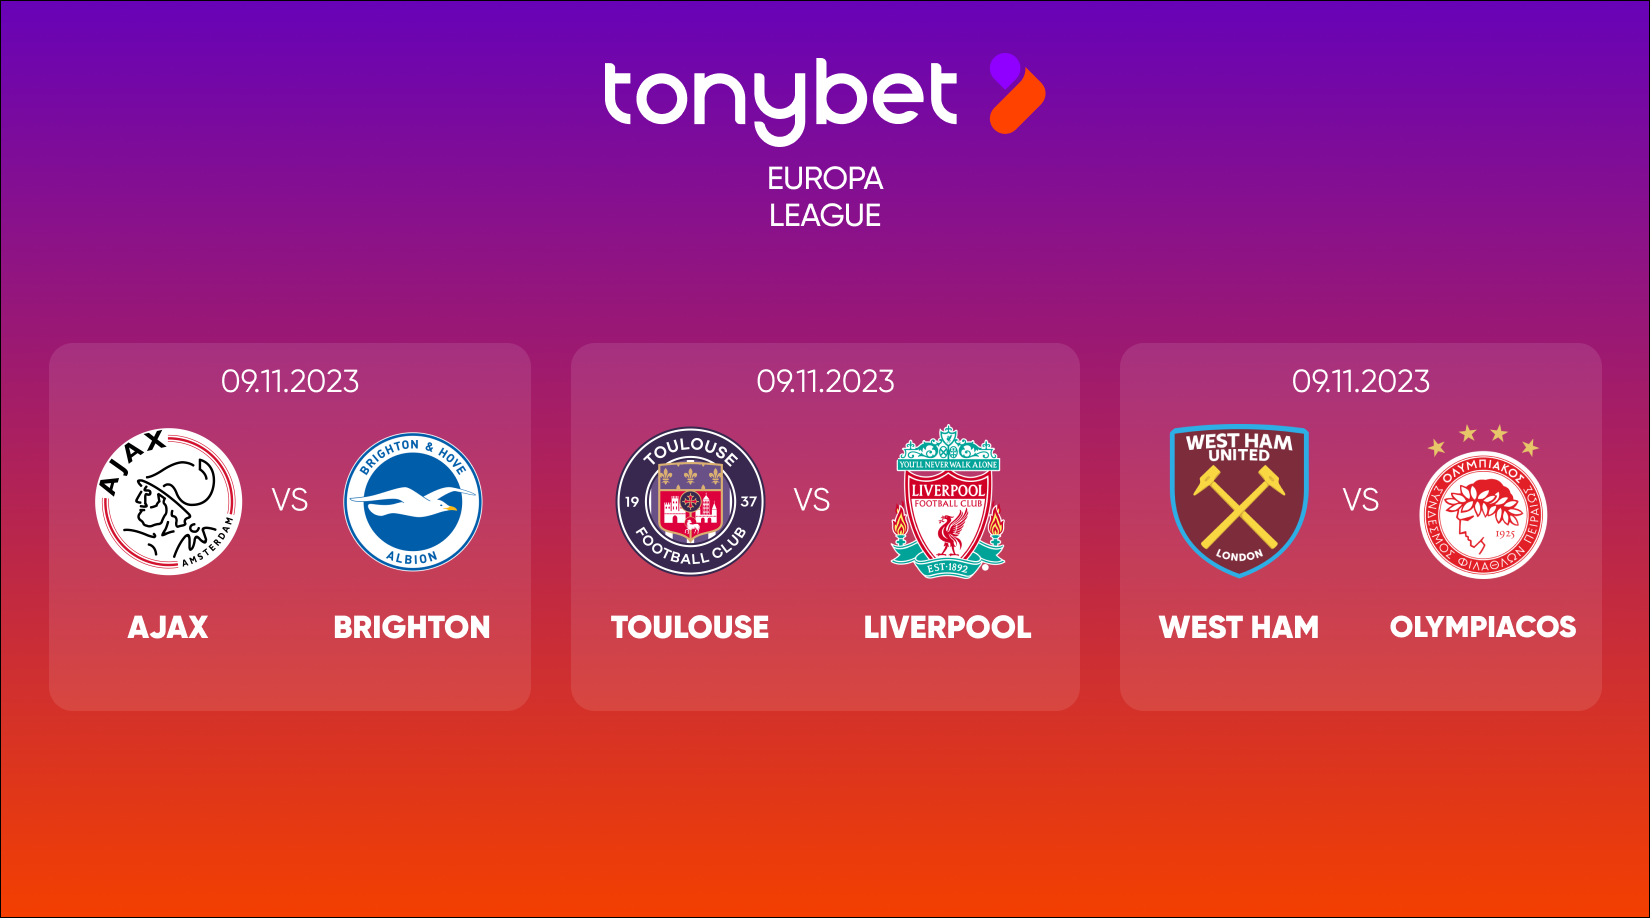 UEFA Europa League Matchday 4 Predictions: Ajax – Brighton, Toulouse – Liverpool, West Ham – Olympiacos